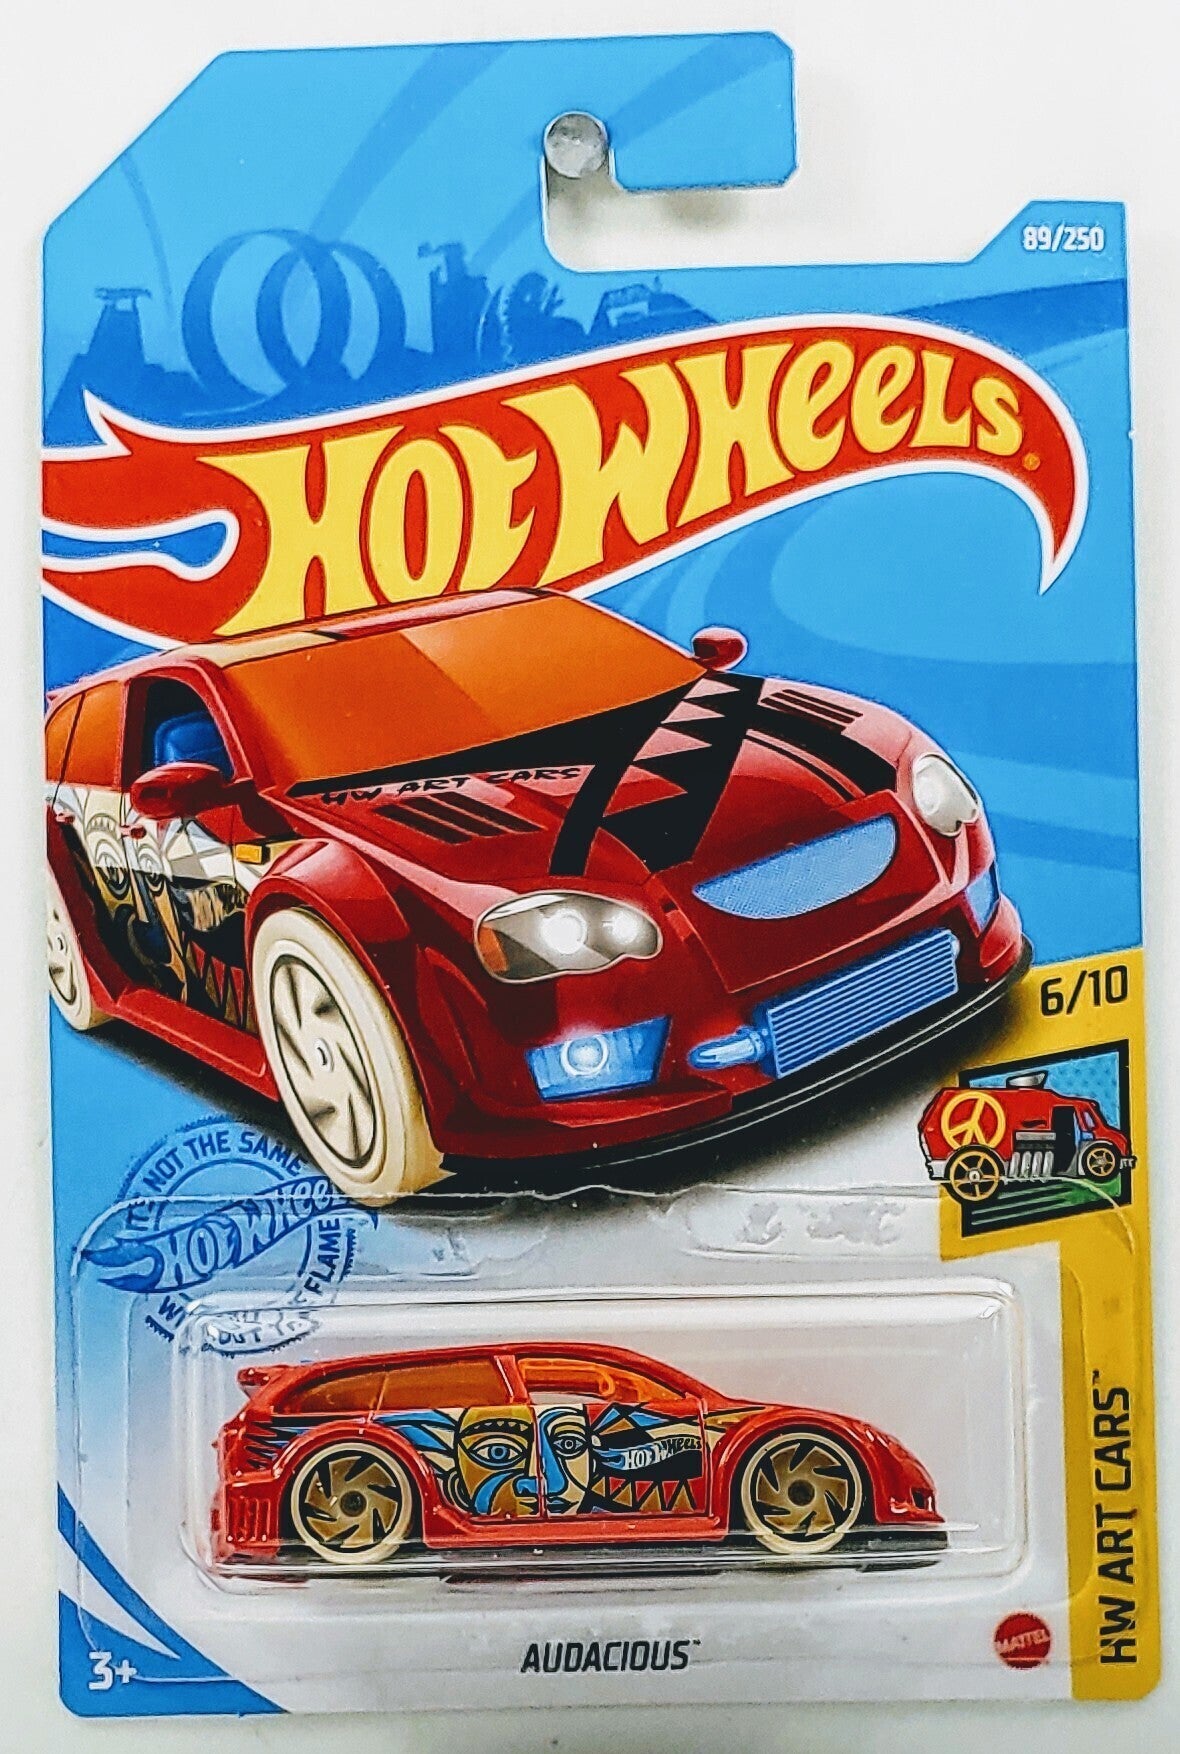 Hot Wheels 2021 - Collector # 089/250 - HW Art Cars 6/10 - Audacious - Red / Letter 'R' - IC